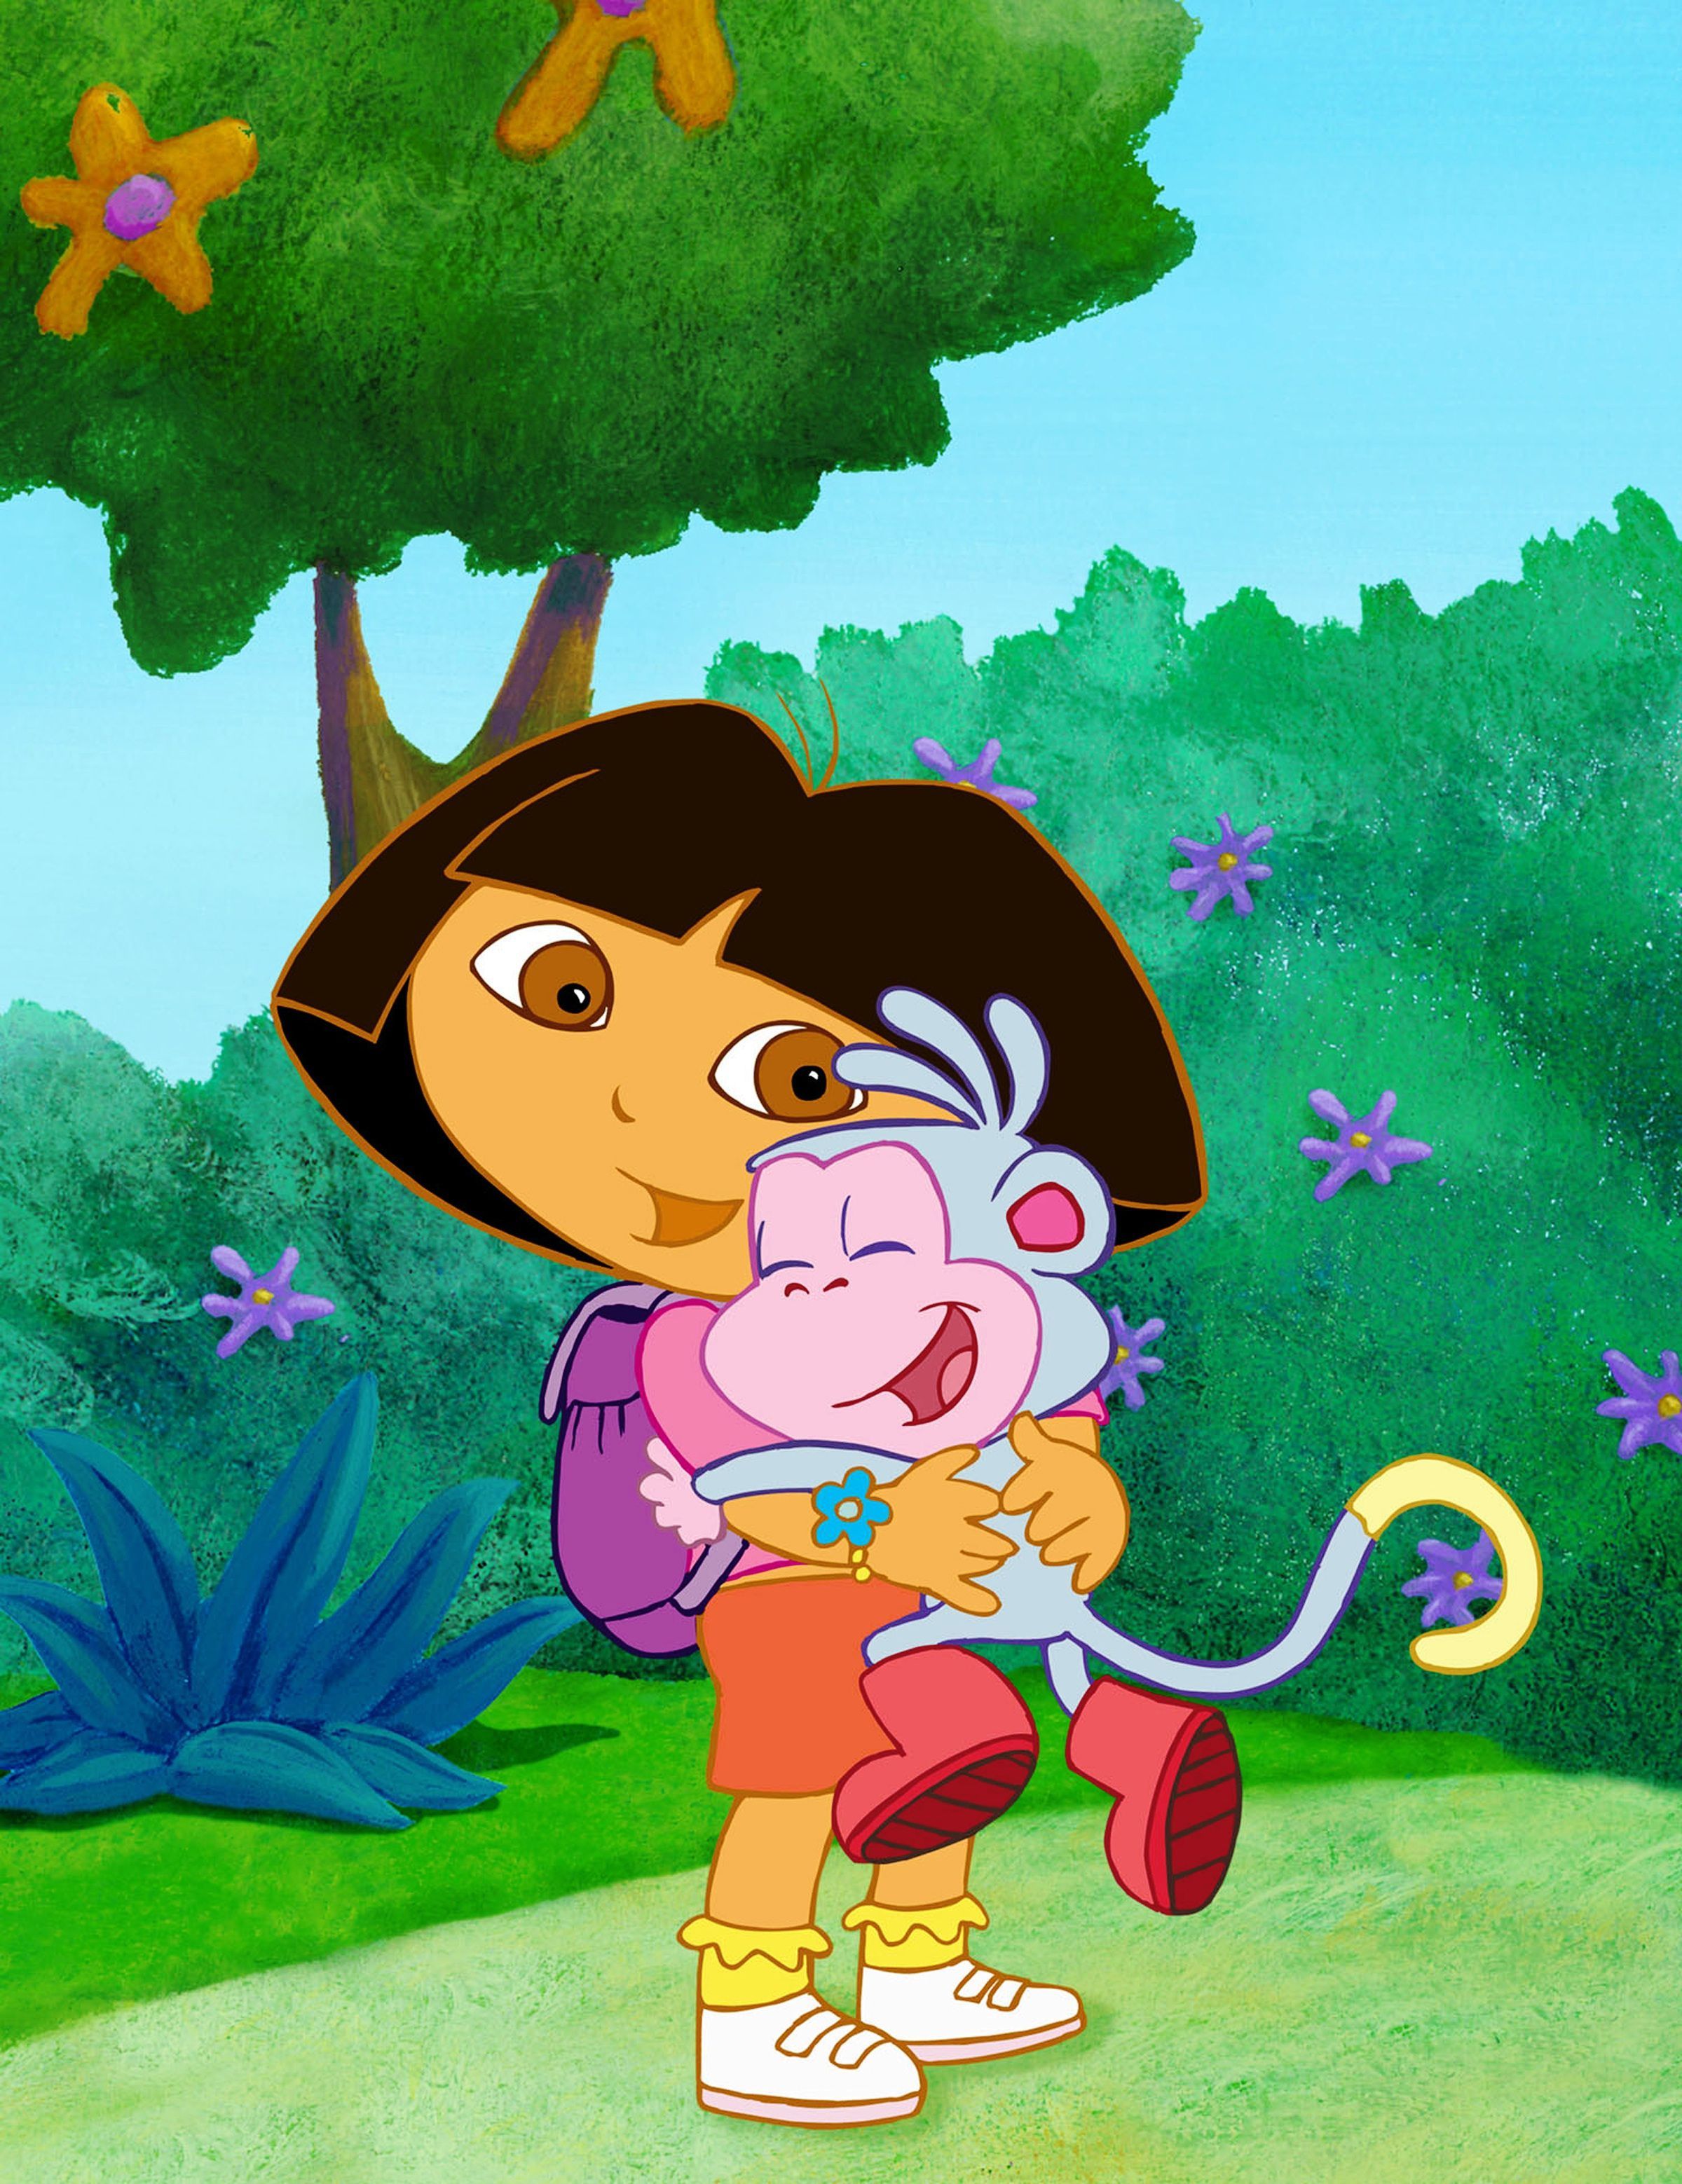 Over the past 10 years, Dora the Explorer has made a lot of friends. Here is a visual guide to some of the m. Dora wallpaper, Dora the explorer, Cartoon caracters